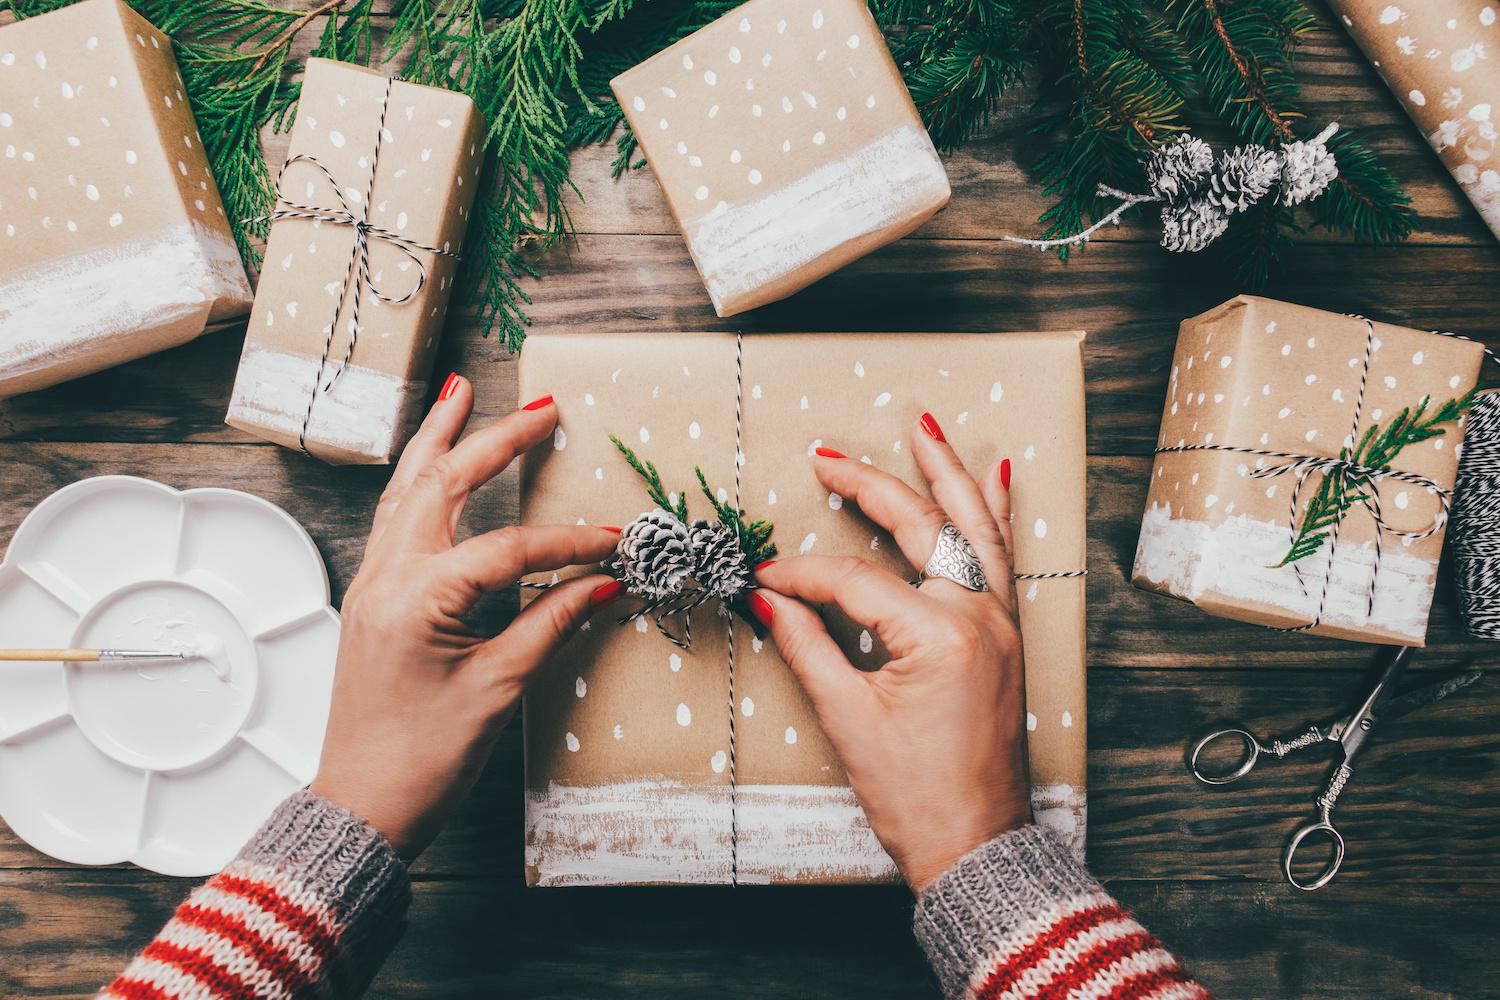 Hands Wrapping Holiday Gifts - Sustainable Holiday Gift Guide